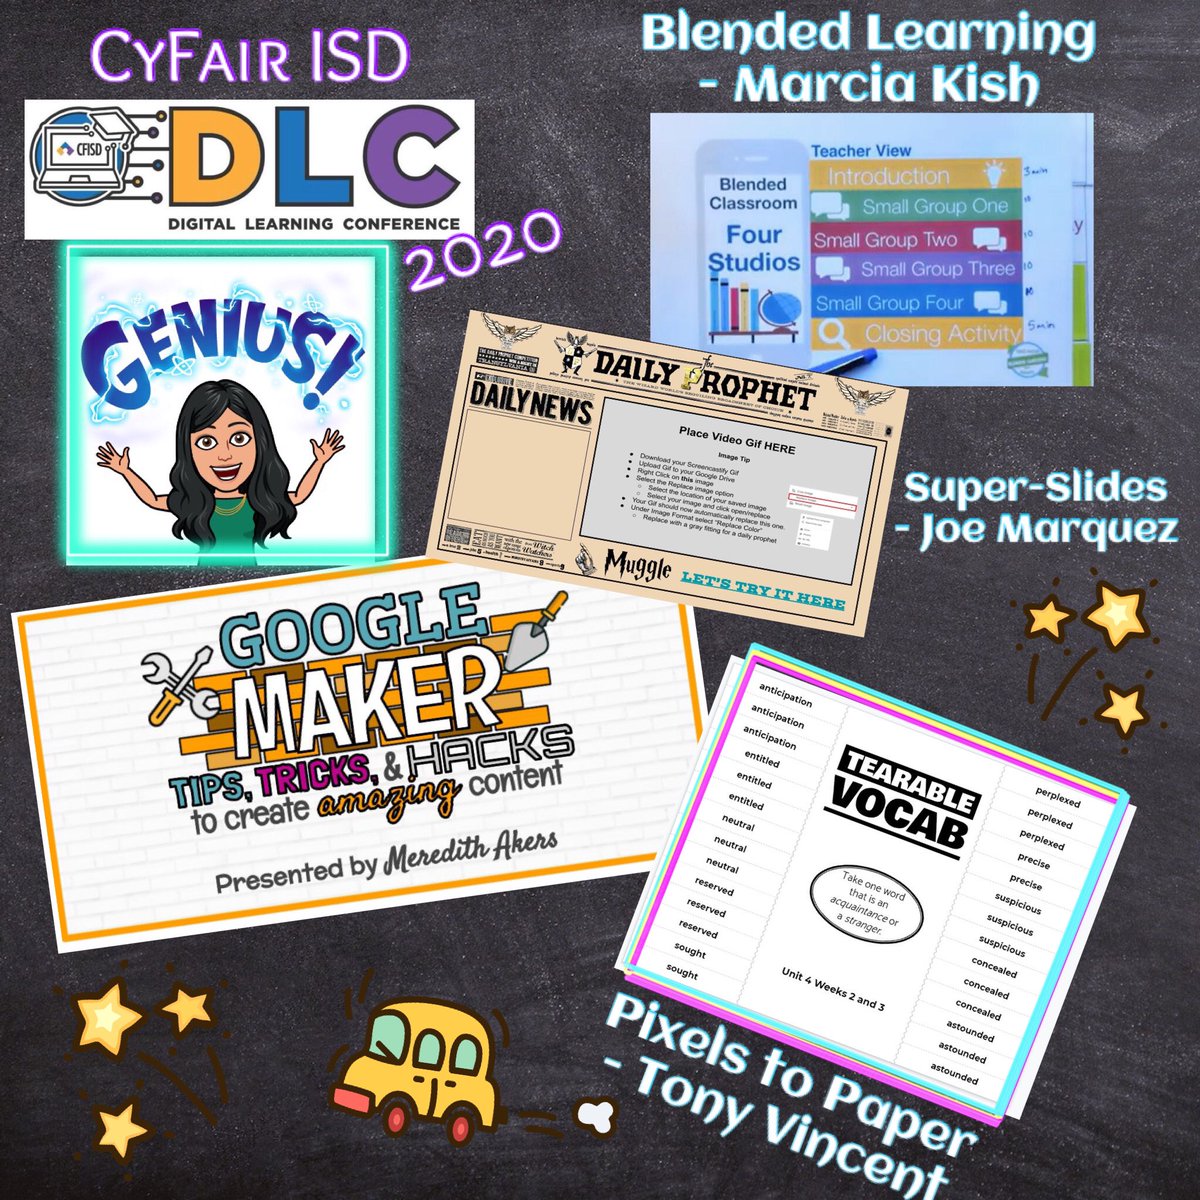 @CyFairISD #CFISDDLC #CFISDDLC2020 never disappoints. Loved learning new tech tips from the best! Innovative way to go live on @YouTube through @zoom_us! Thank you - @dsdPD, @meredithakers, @JoeMarquez70 & @tonyvincent! #AndreinAction